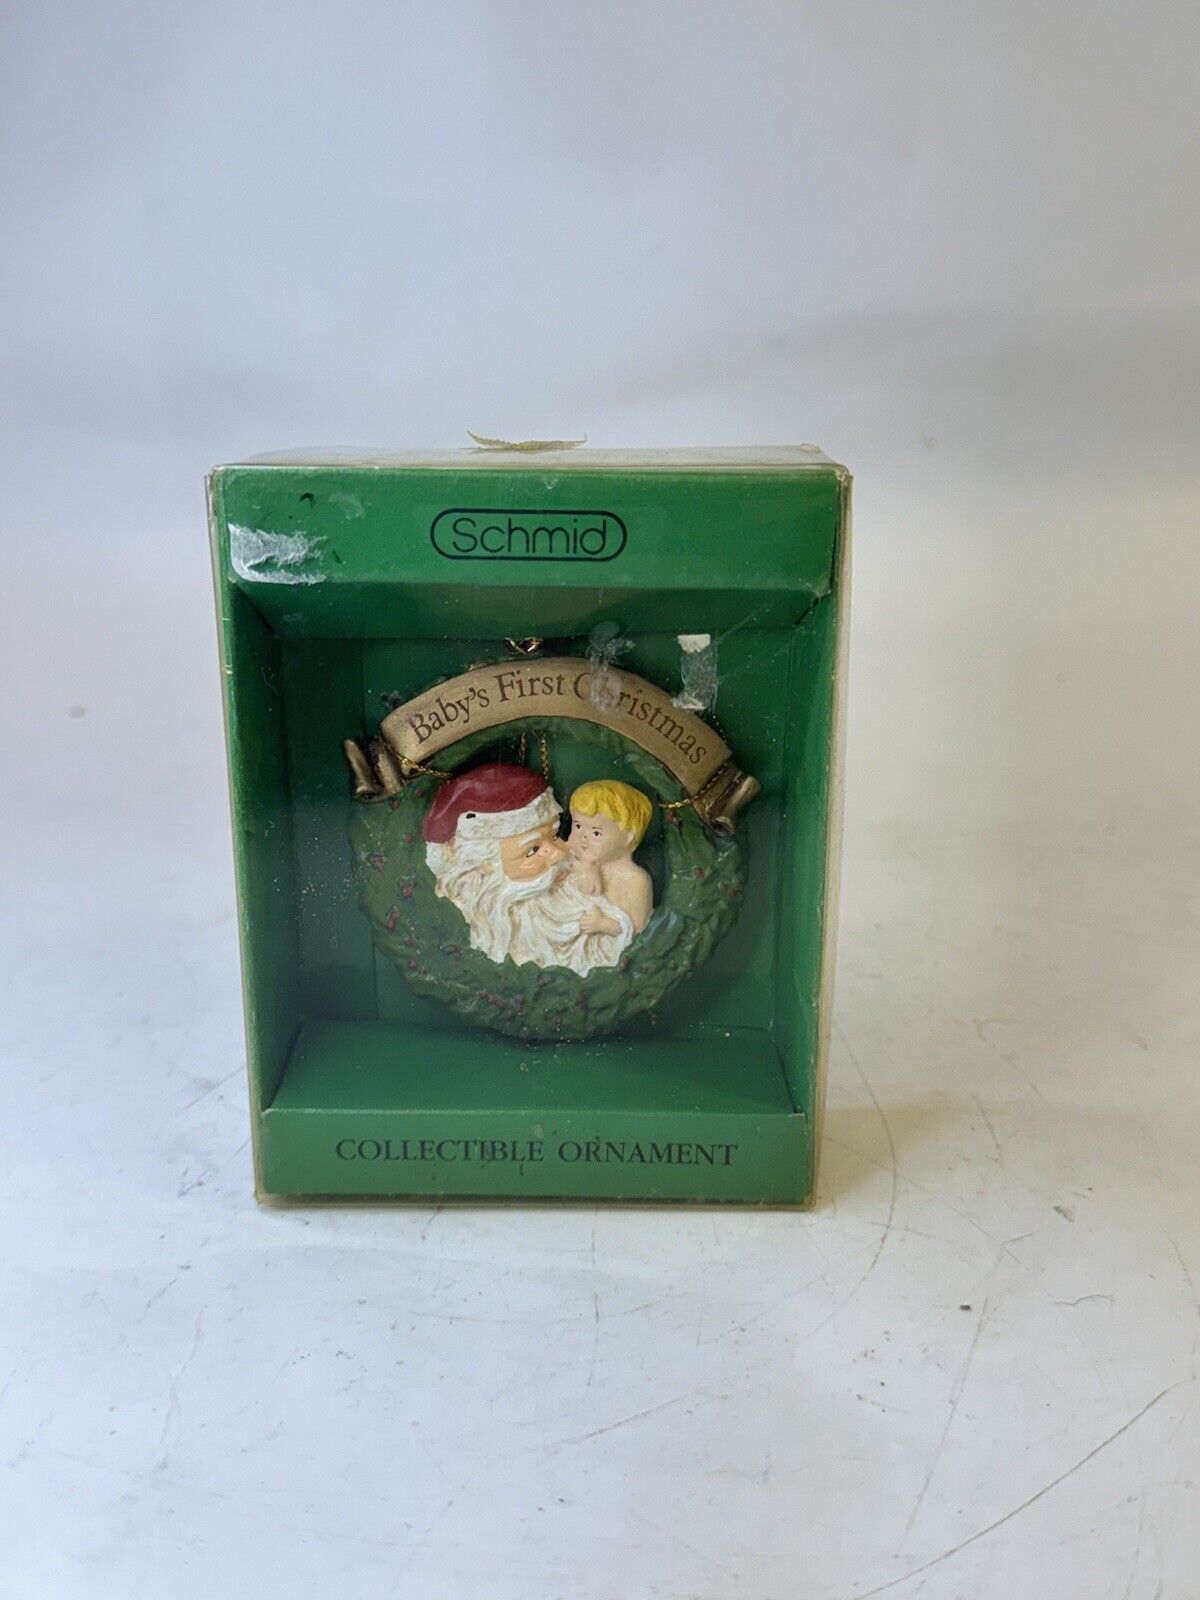 1990 RARE Schmid Vintage Colectible Ornament Baby's First Christmas Santa Claus